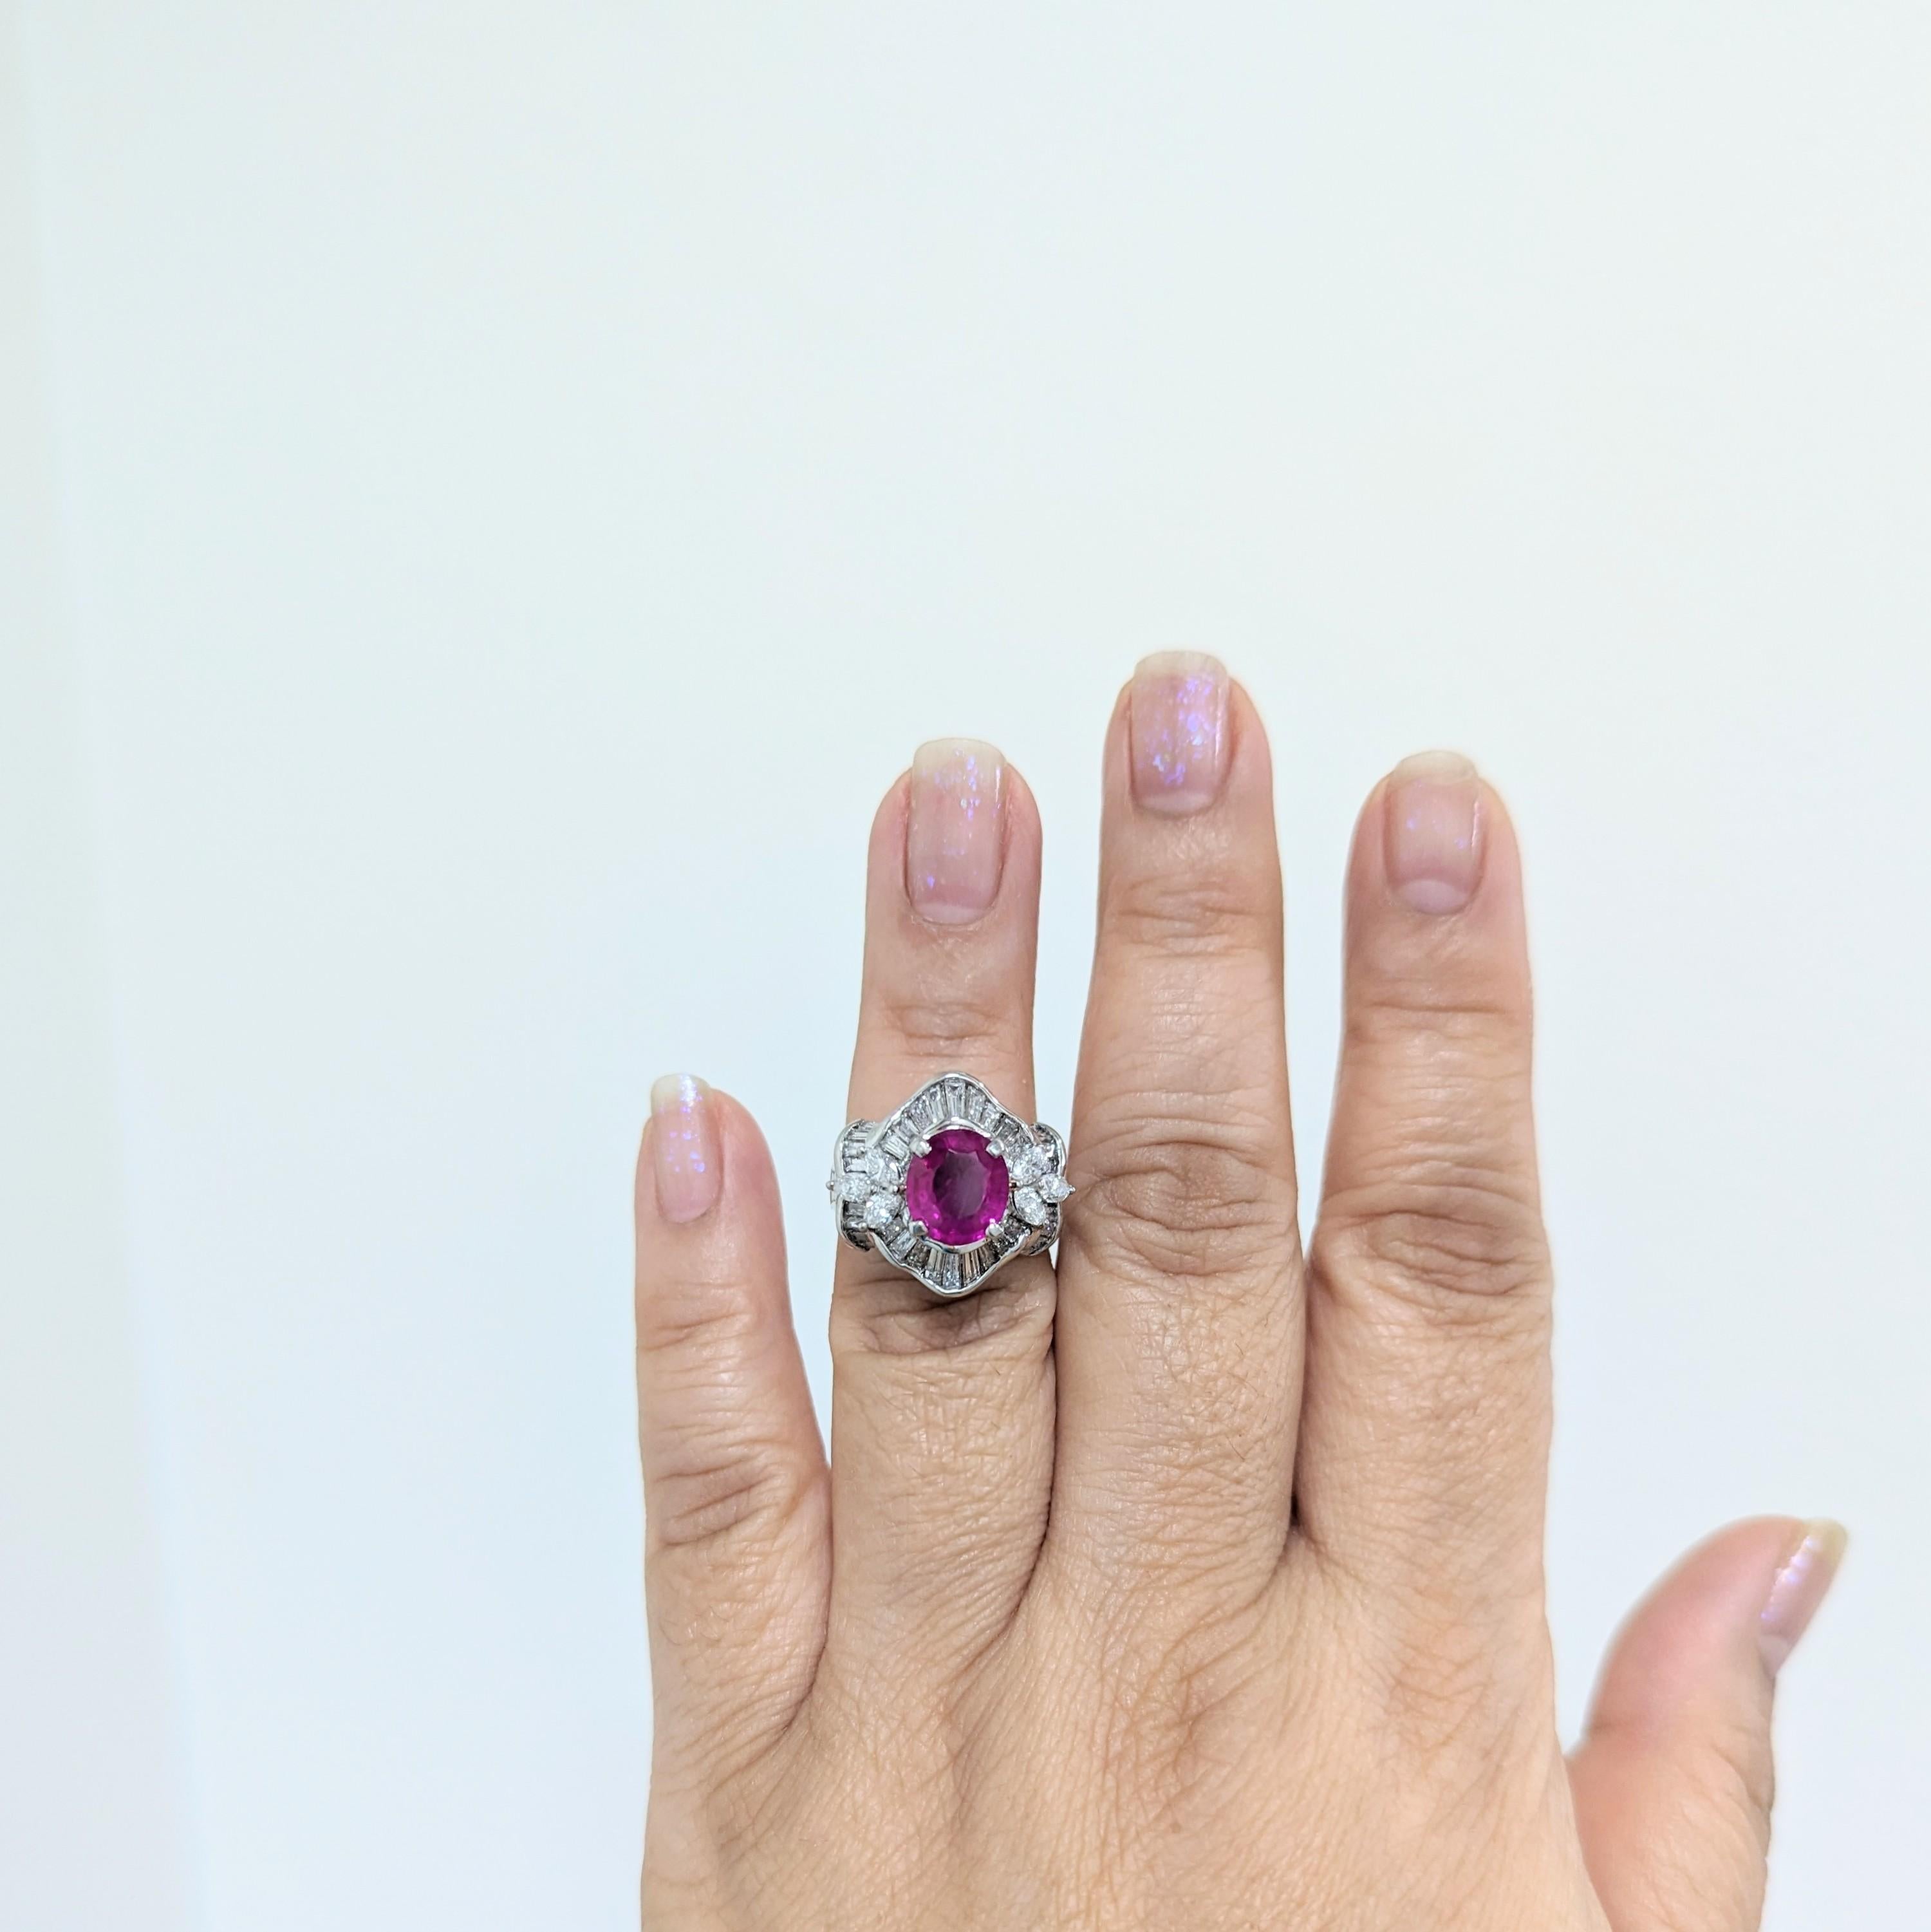 Beautiful 2.78 ct. Burma purplish red ruby oval with GIA certificate and 2.62 ct. good quality white diamond marquise shapes and baguettes.  Handmade in platinum.  Ring size 6.25.  GIA certificate included.